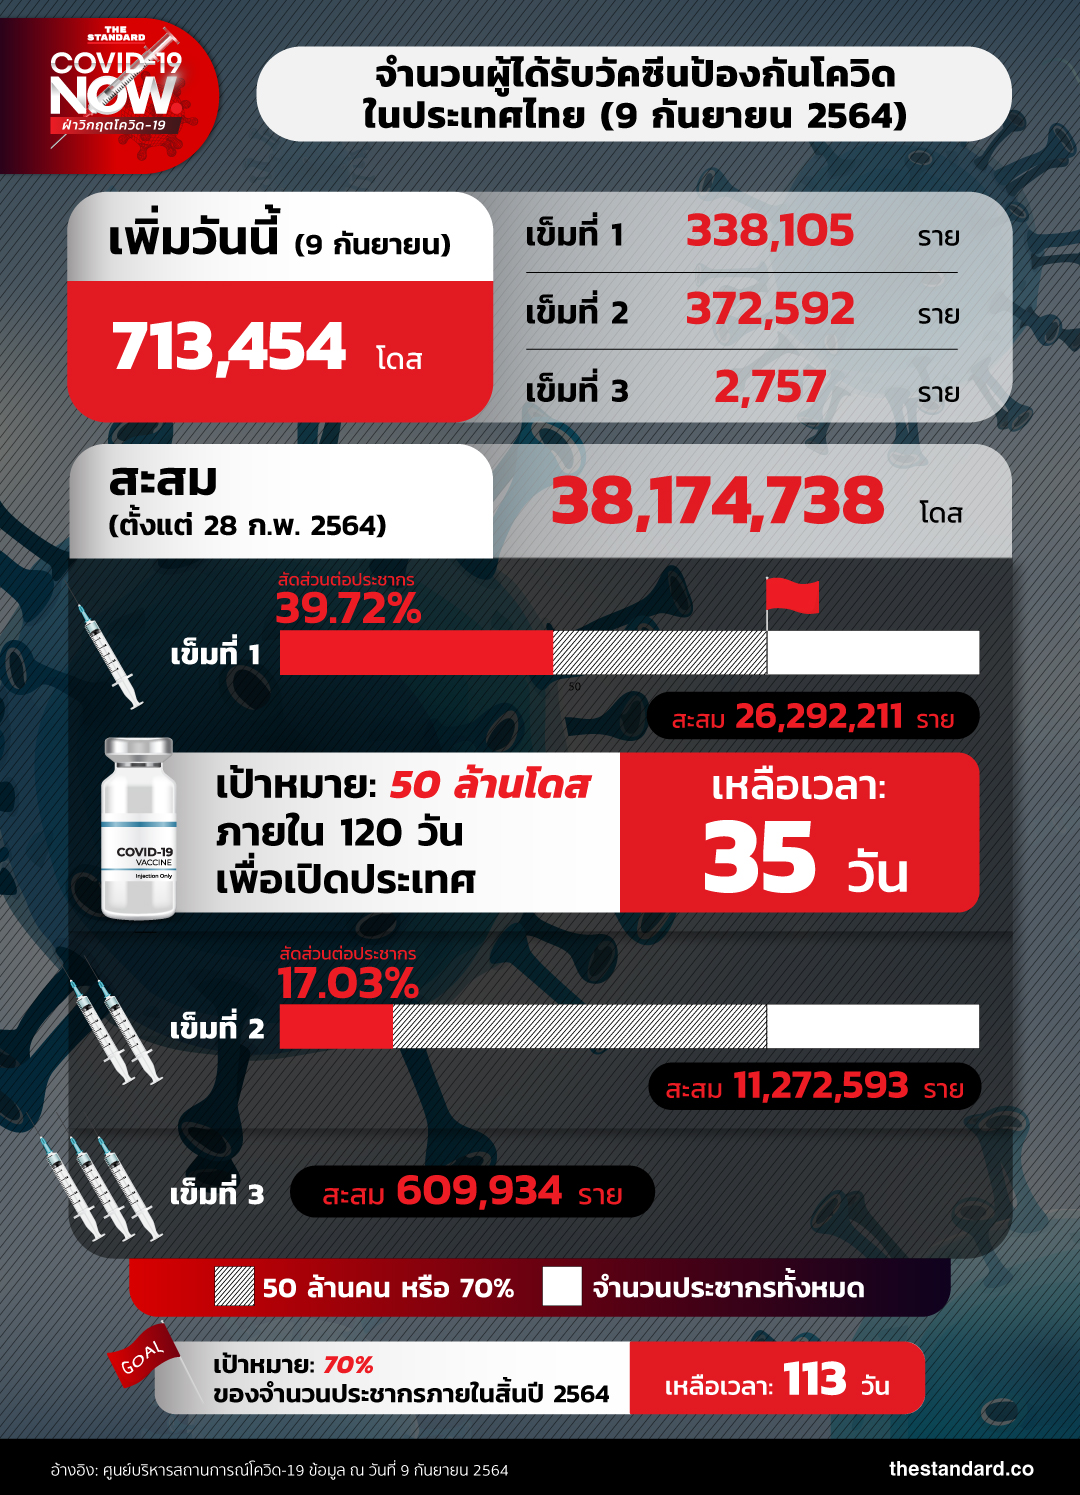 number-of-people-got-covid-19-vaccines-in-thailand-090964